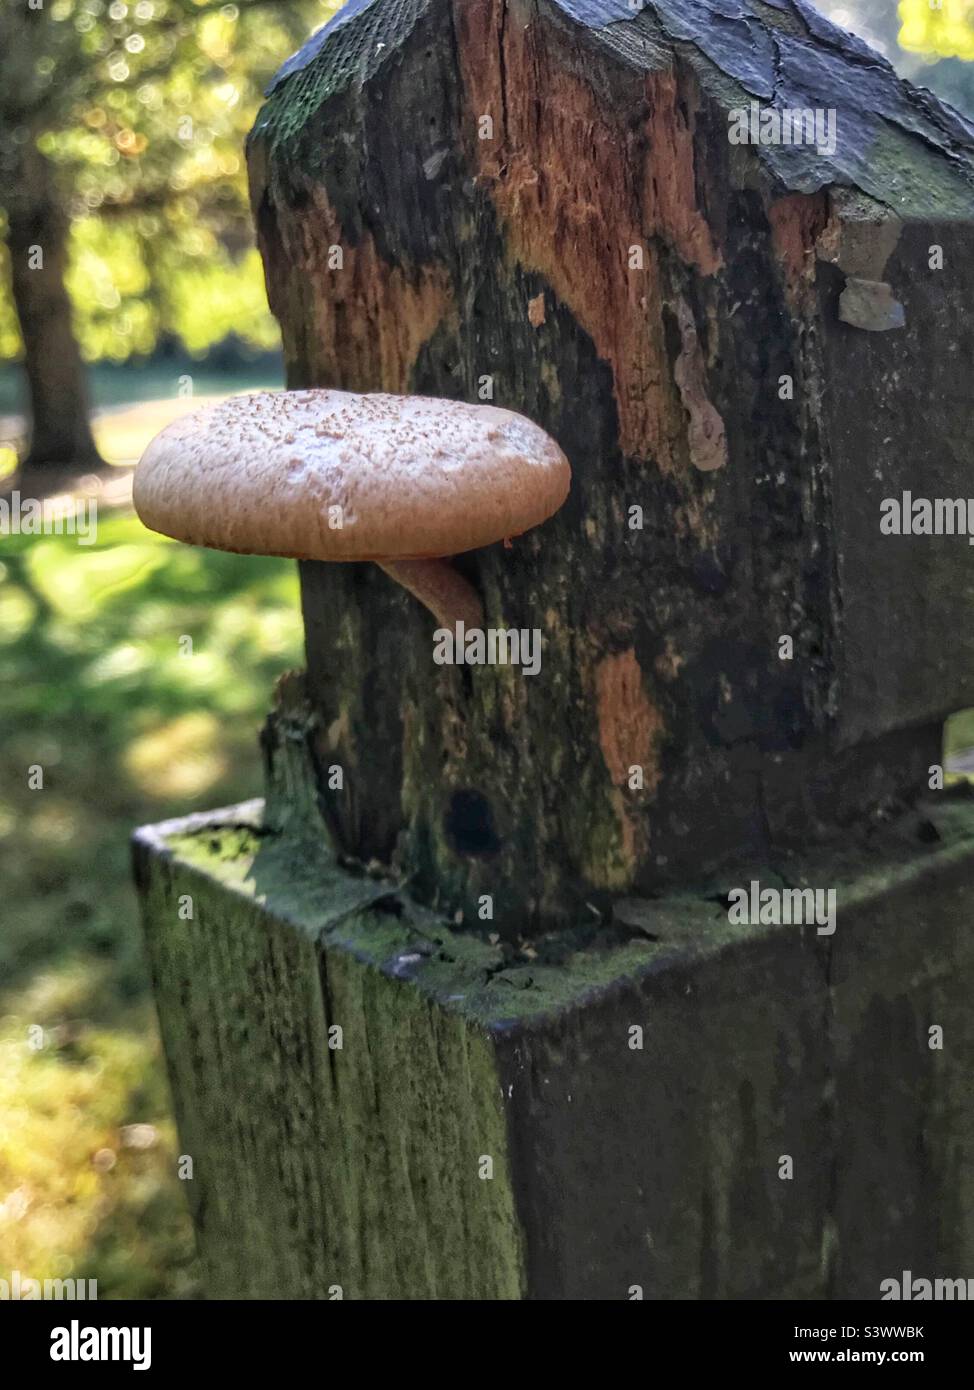 Mushroom growing from wooden fence post Stock Photo